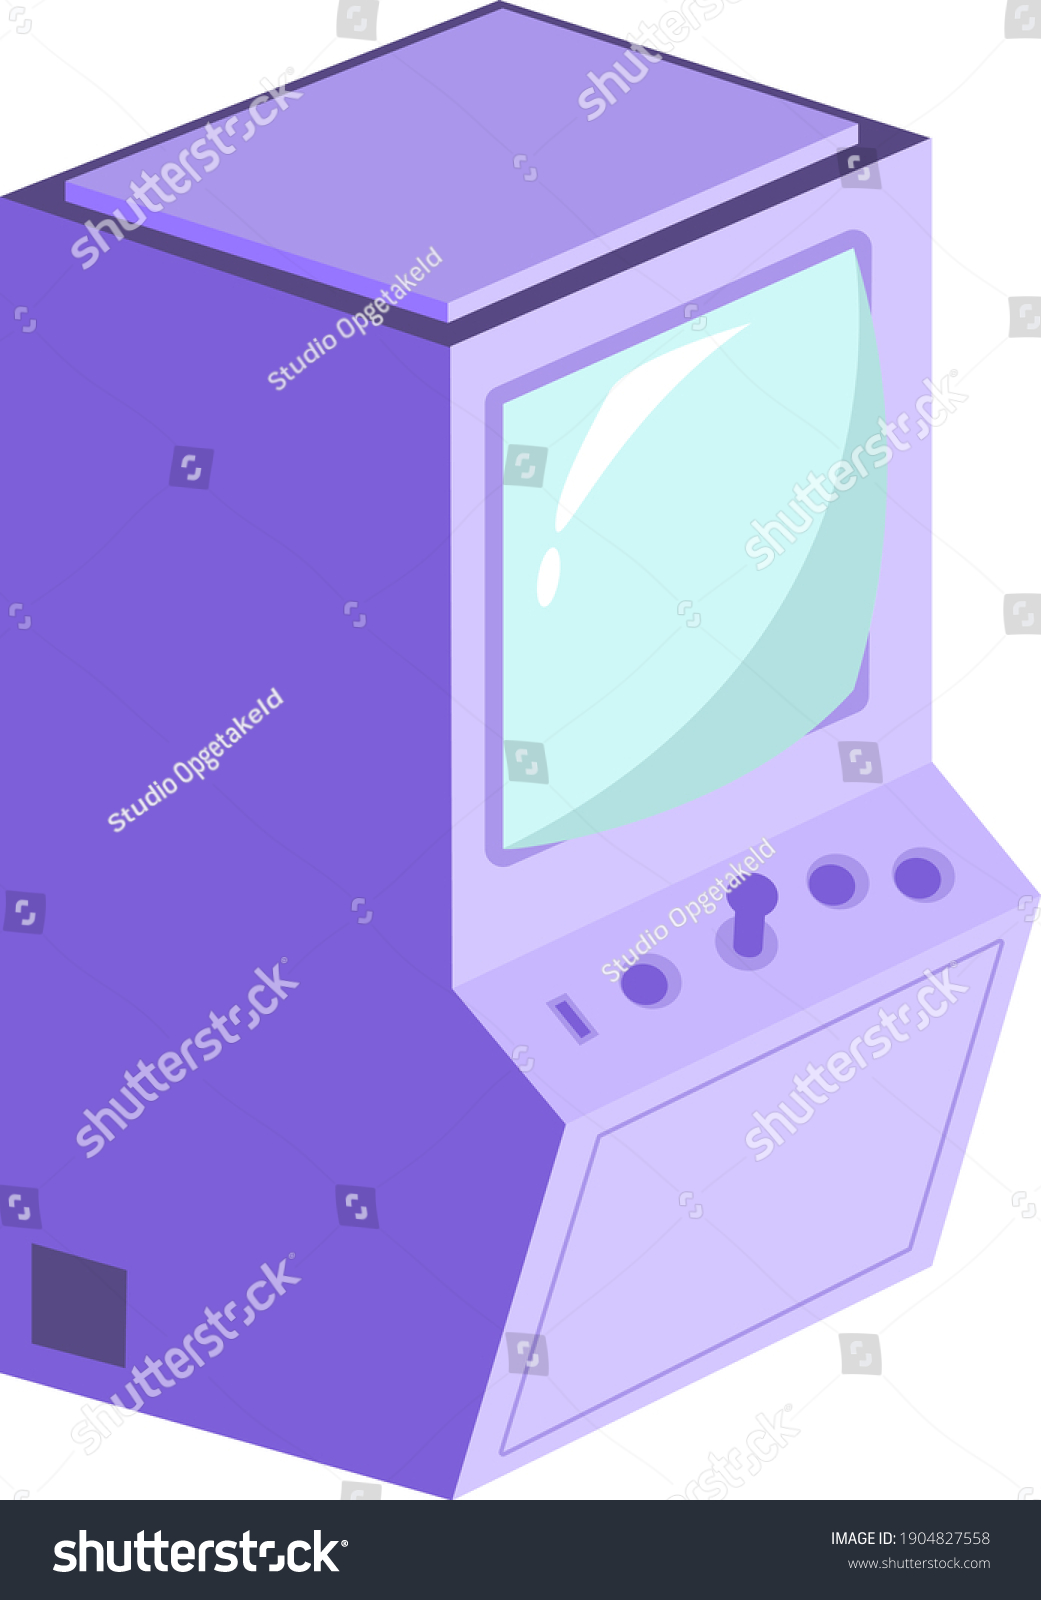 SVG of Game retro arcade console machine 3d vector graphic isolated illustration or icon	
 svg